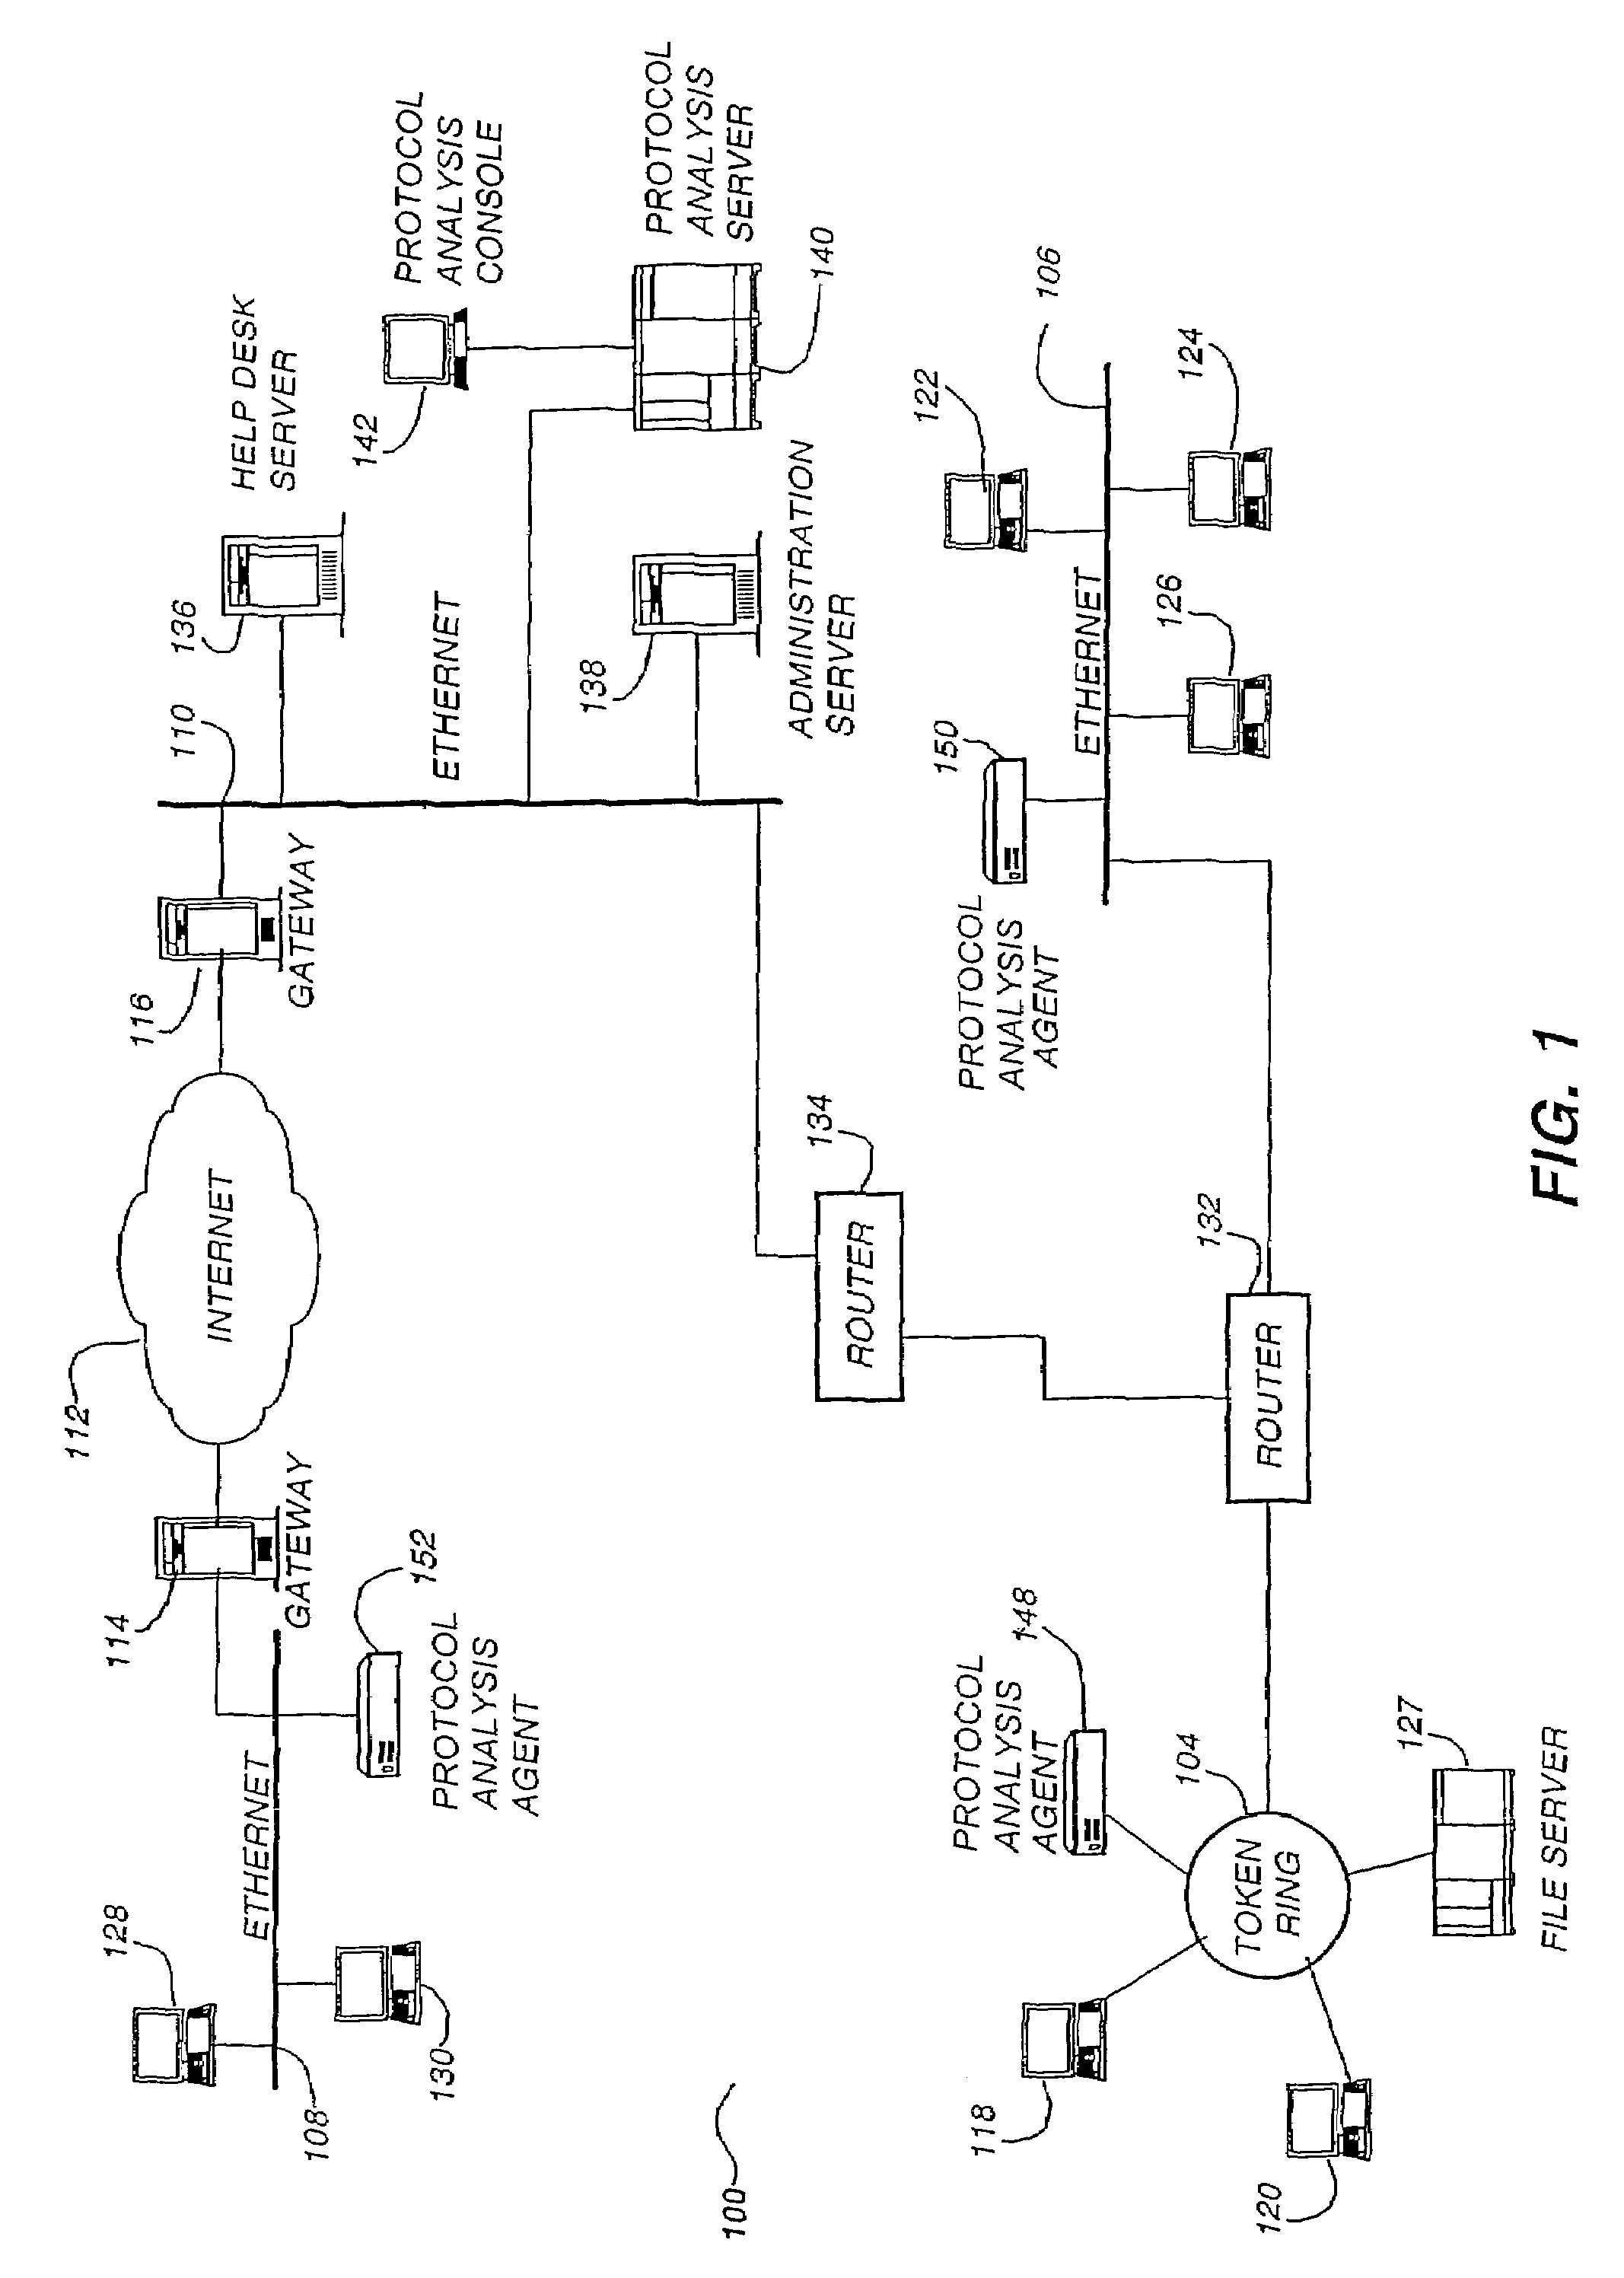 Graphical user interface system and method for organized network analysis